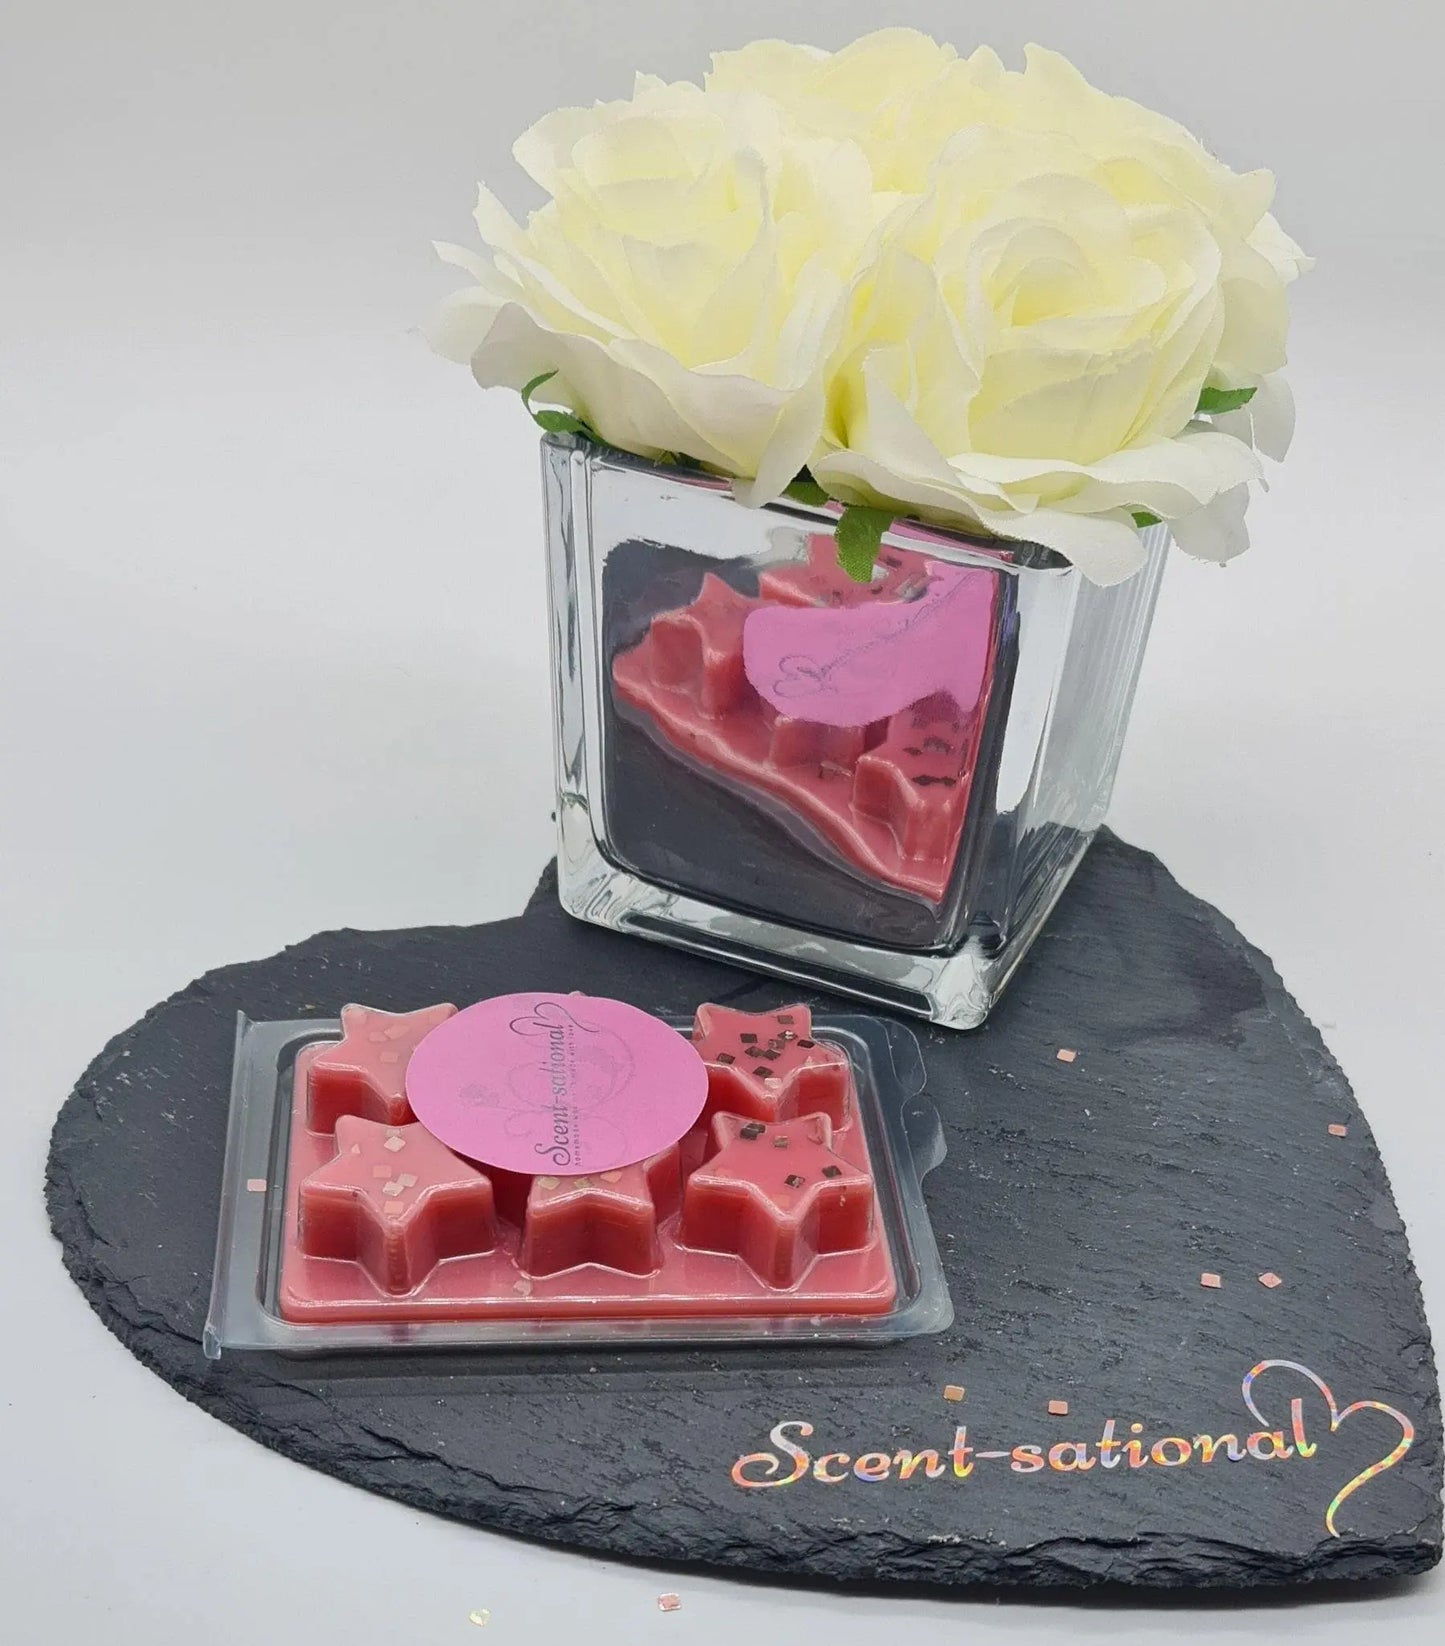 Library Book Wax Melts Scent Sational Wax melts